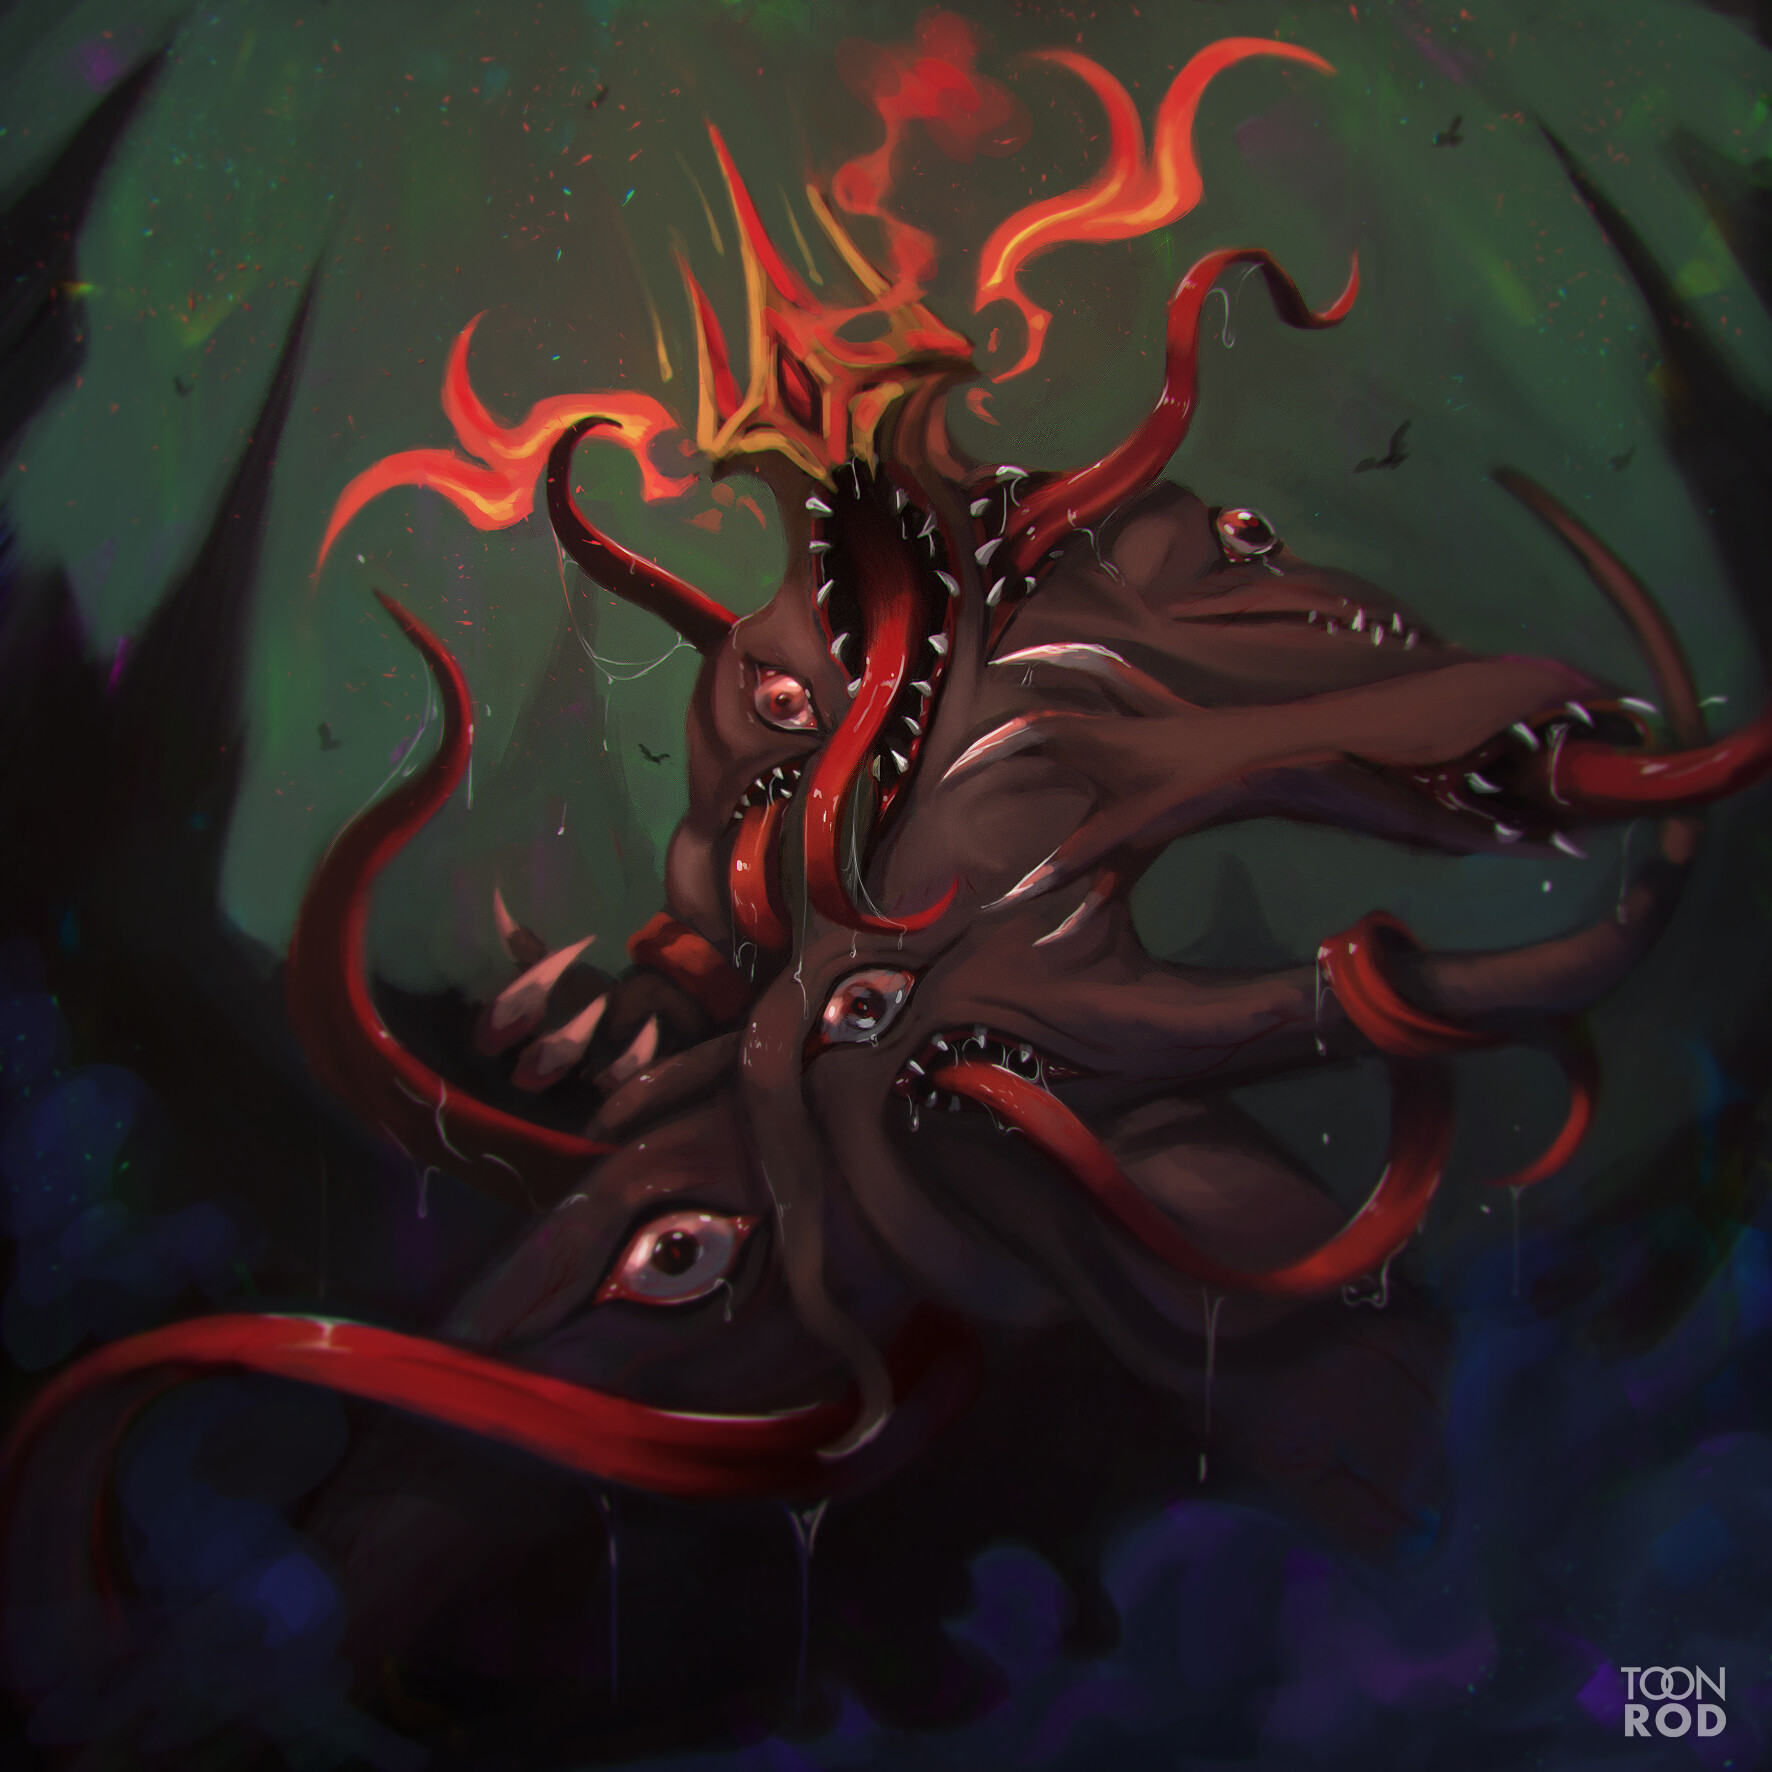 SCP 999 met The Scarlet king (scp001) #scp999 #scp001 #scarletking #Th